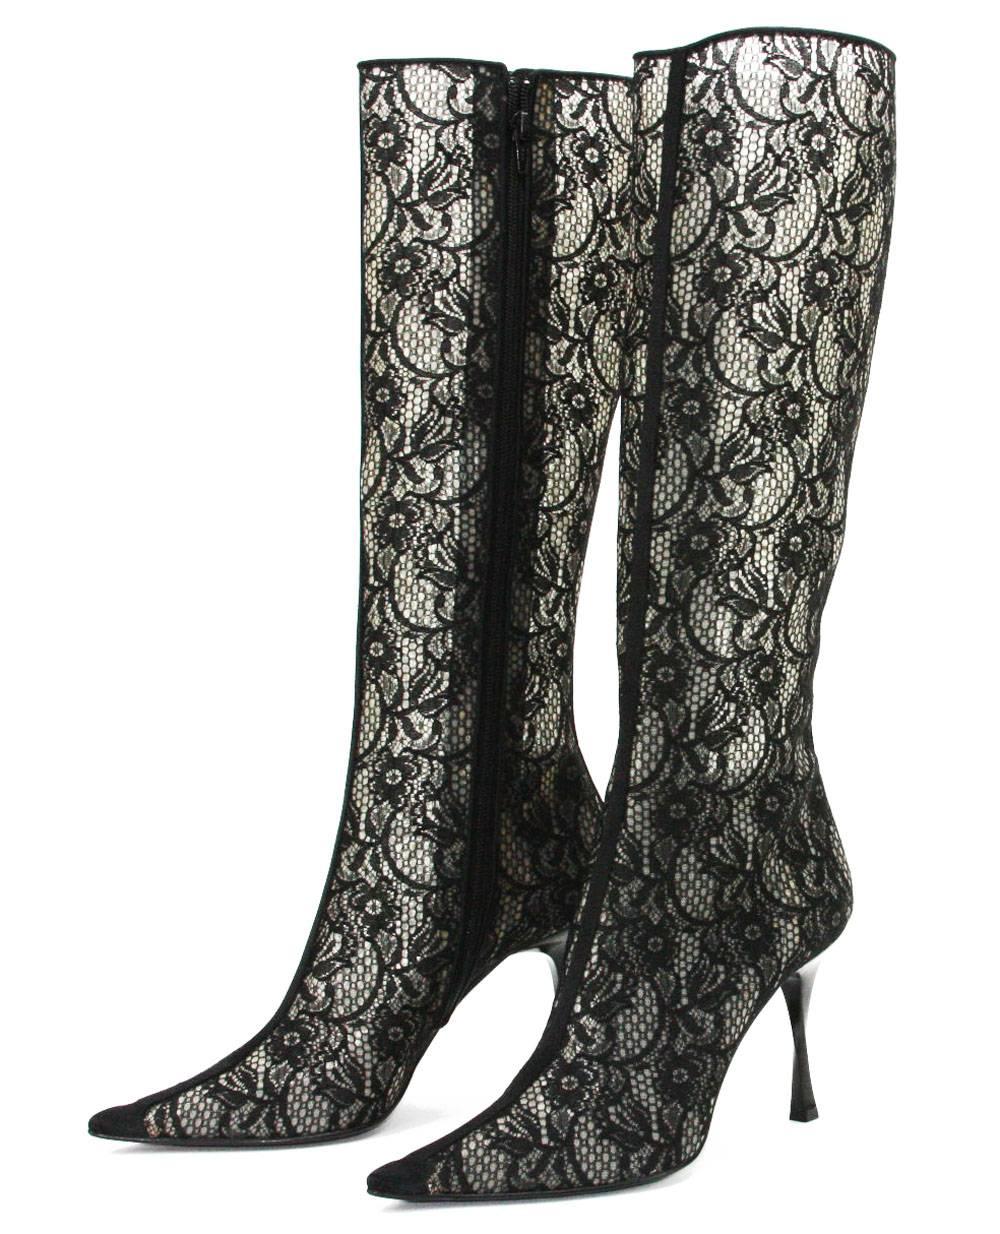 New Casadei Lace Boots
Designer size - 9 B
Color - Black
Lace Upper
Satin Trim
Side Zip Closure
Leather Sole and Insole
Twisted Heel - 3.5 inches
Made in Italy
New with Box.